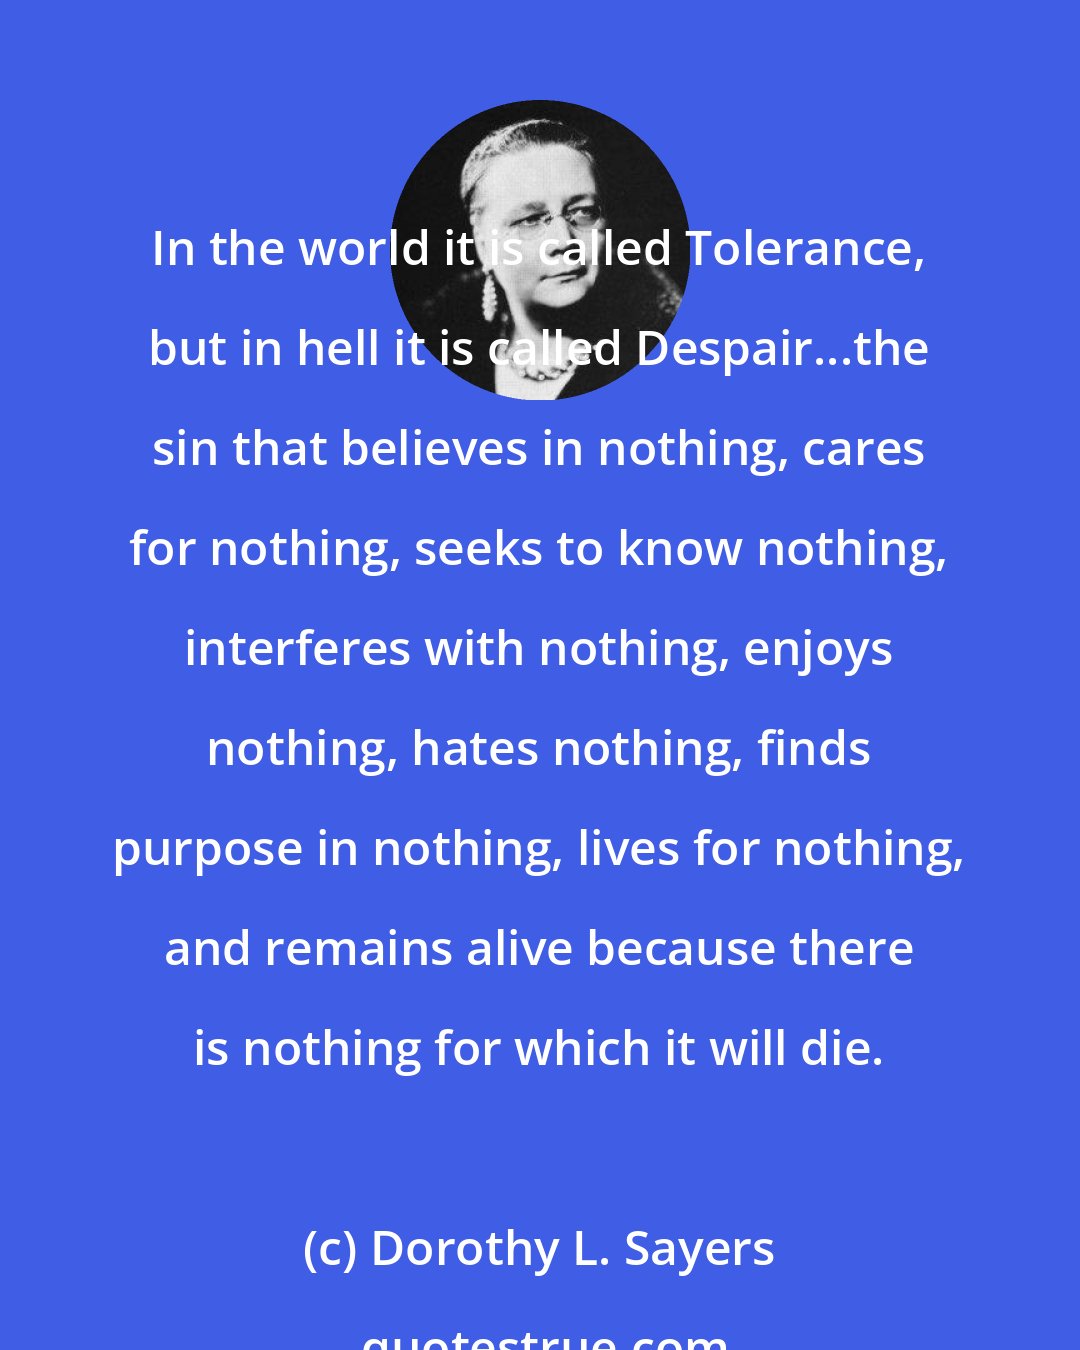 Dorothy L. Sayers: In the world it is called Tolerance, but in hell it is called Despair...the sin that believes in nothing, cares for nothing, seeks to know nothing, interferes with nothing, enjoys nothing, hates nothing, finds purpose in nothing, lives for nothing, and remains alive because there is nothing for which it will die.